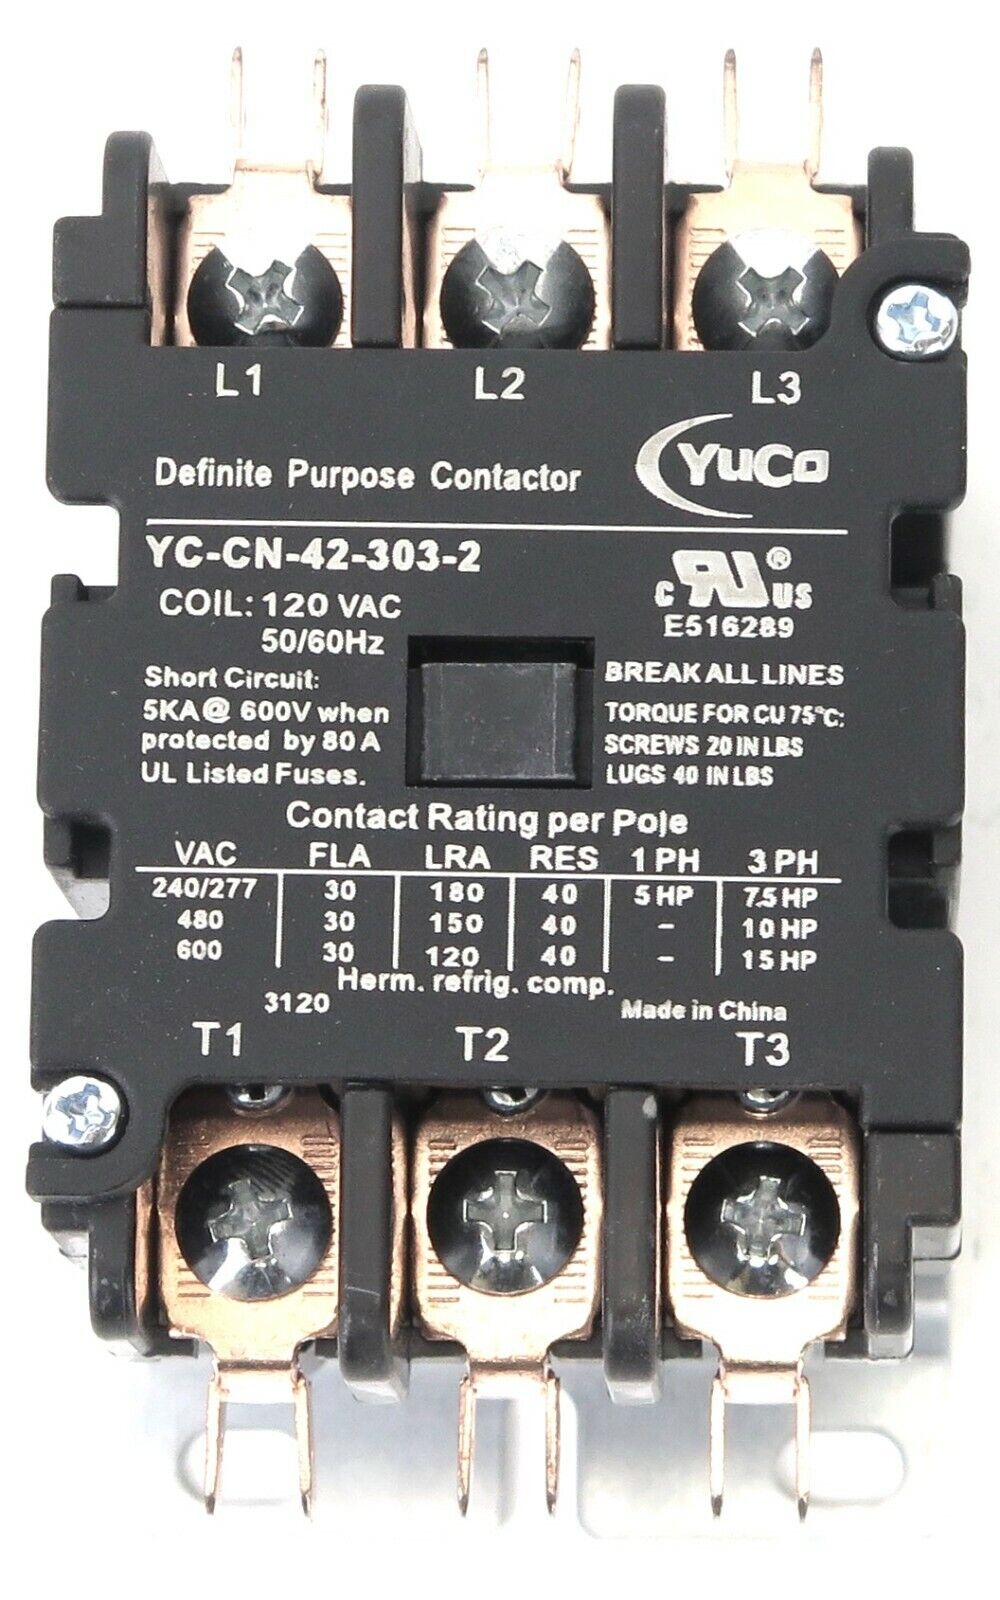 AIR CONDITIONING FLA 30A 600V 3P DP Contactor 120V Coil fits Siemens 42BF35AF